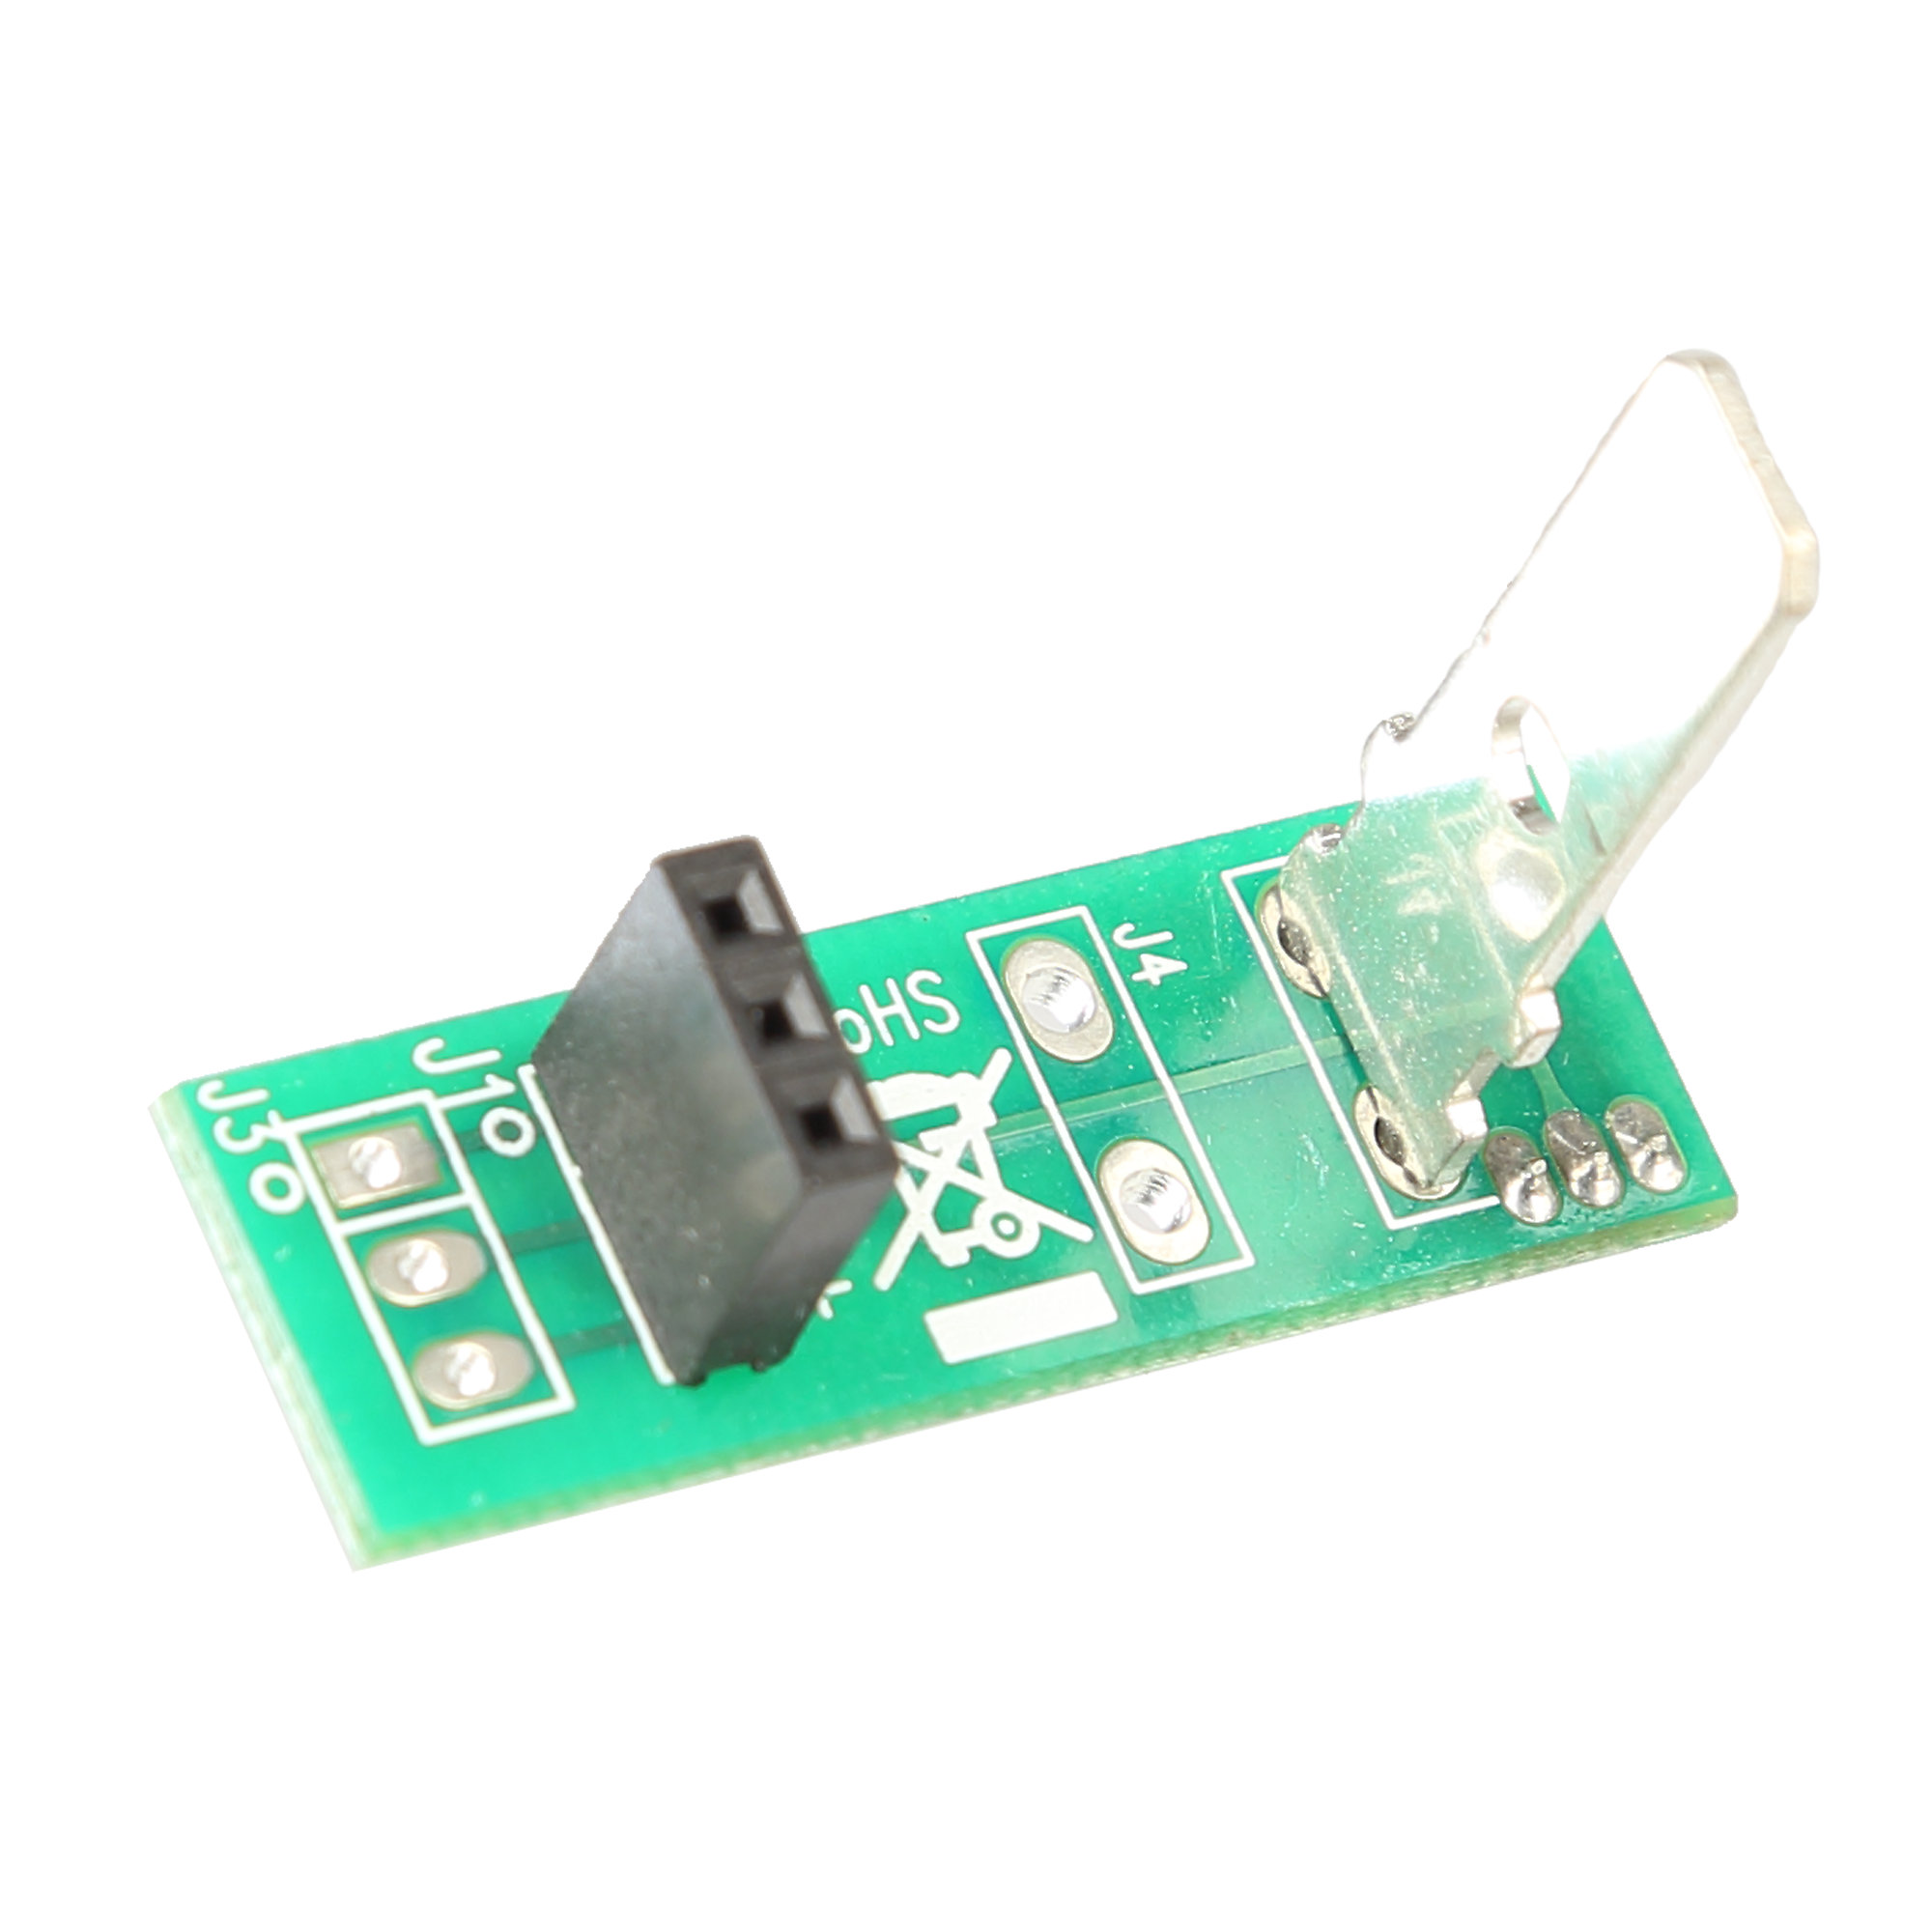 Speed Sensor for Circuit Board, Soldering May be Required, True Treadmill